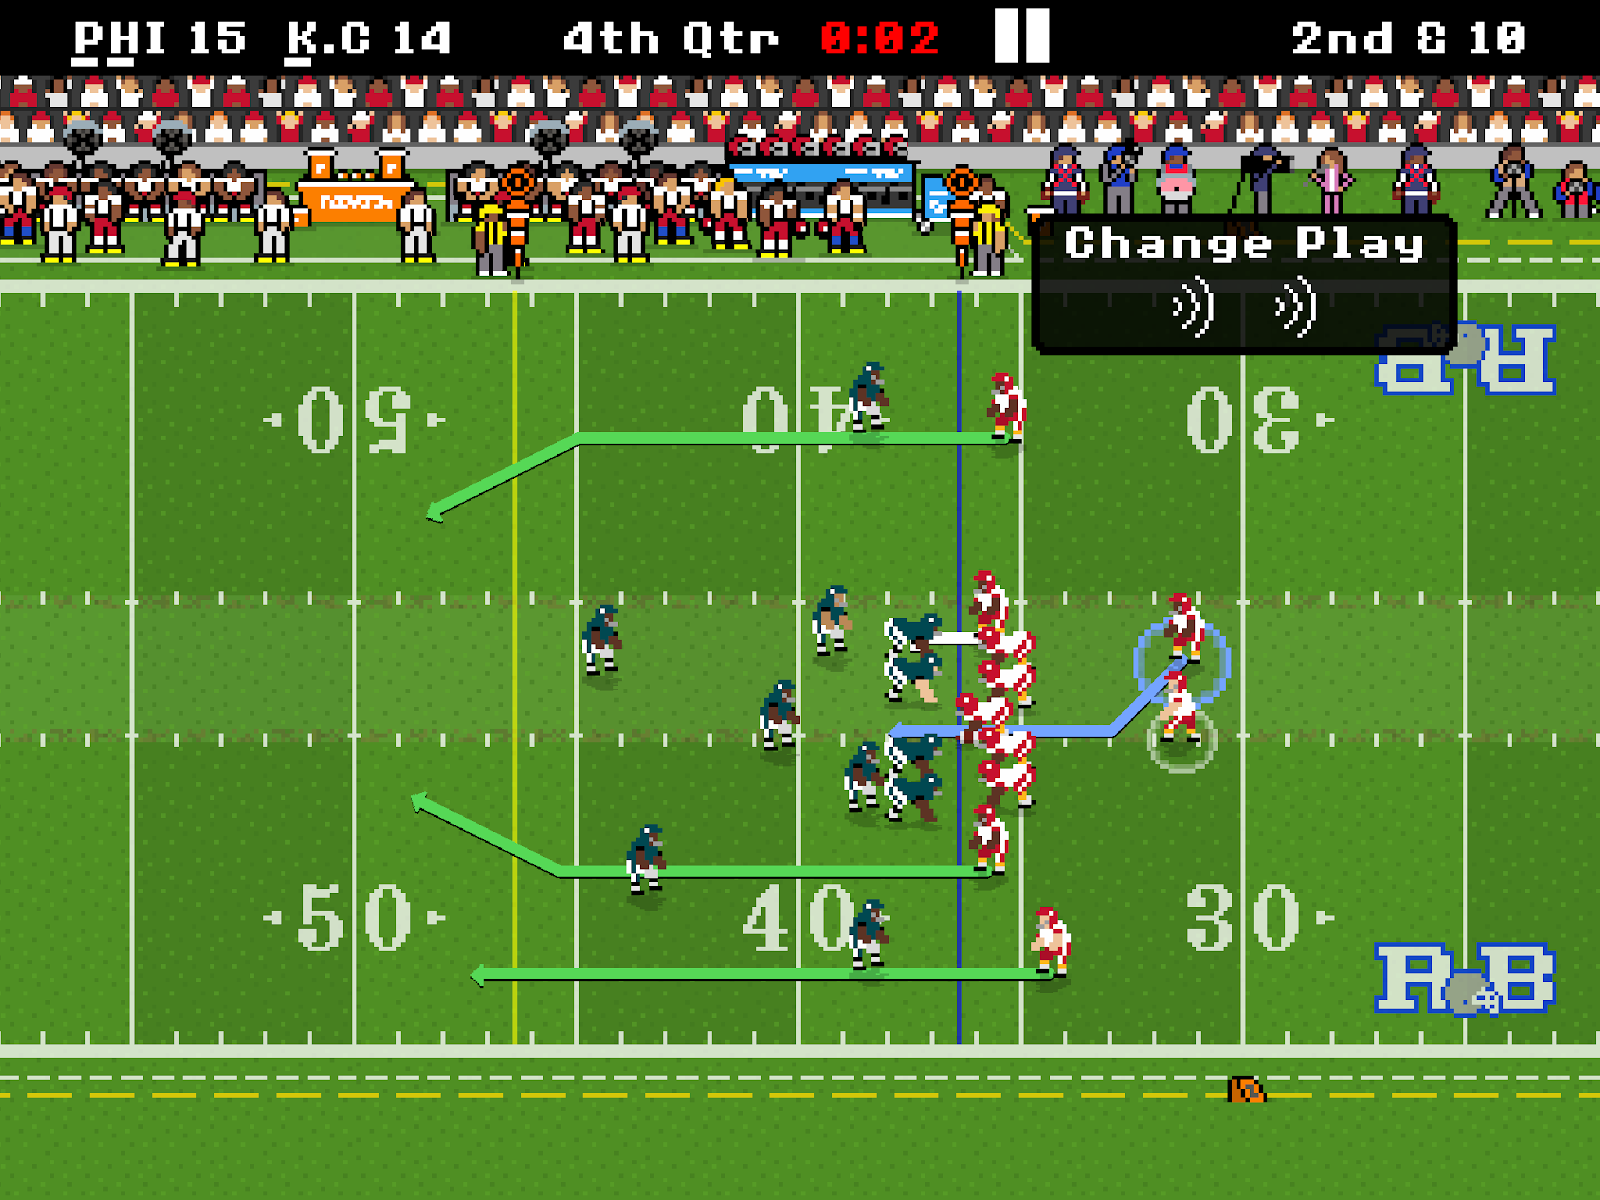 Retro Bowl Guide Tips Tricks  Strategies to Secure Wins and Form a  Dominant Franchise  Level Winner